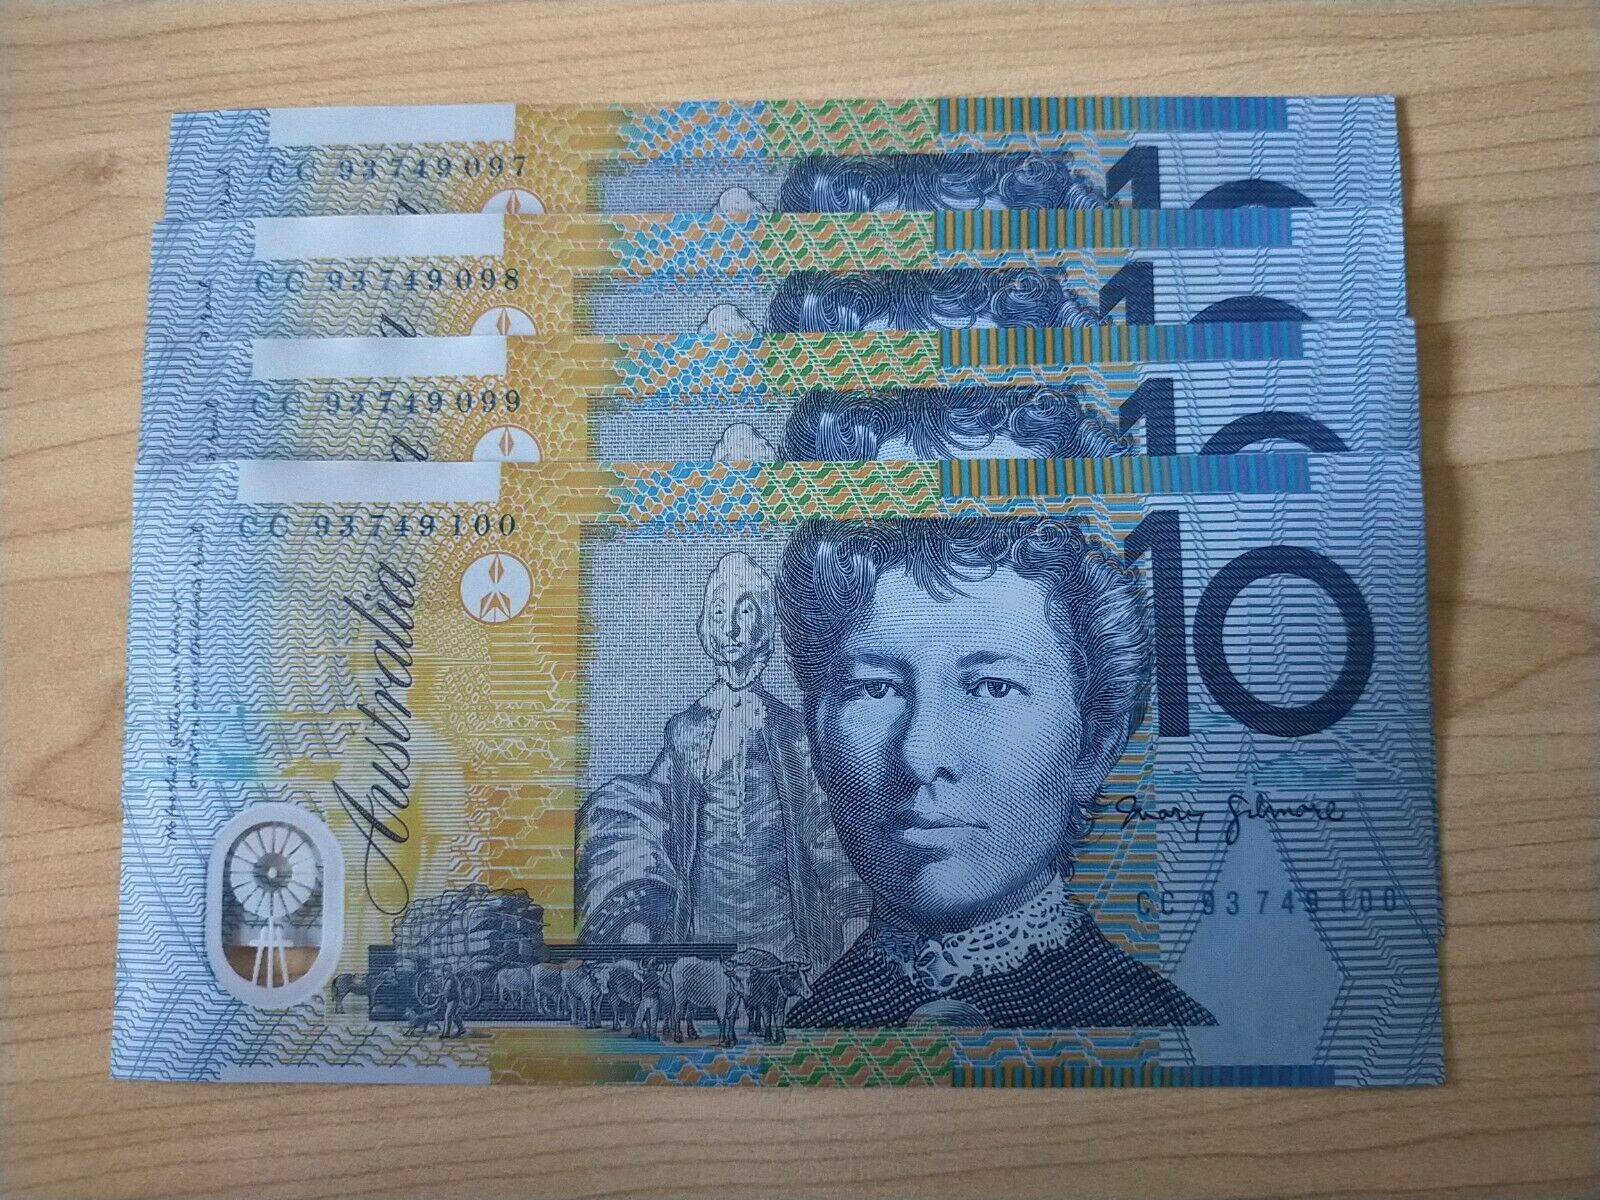 Australia $10 R316a Fraser Evans Run Of 4 Uncirculated Banknotes